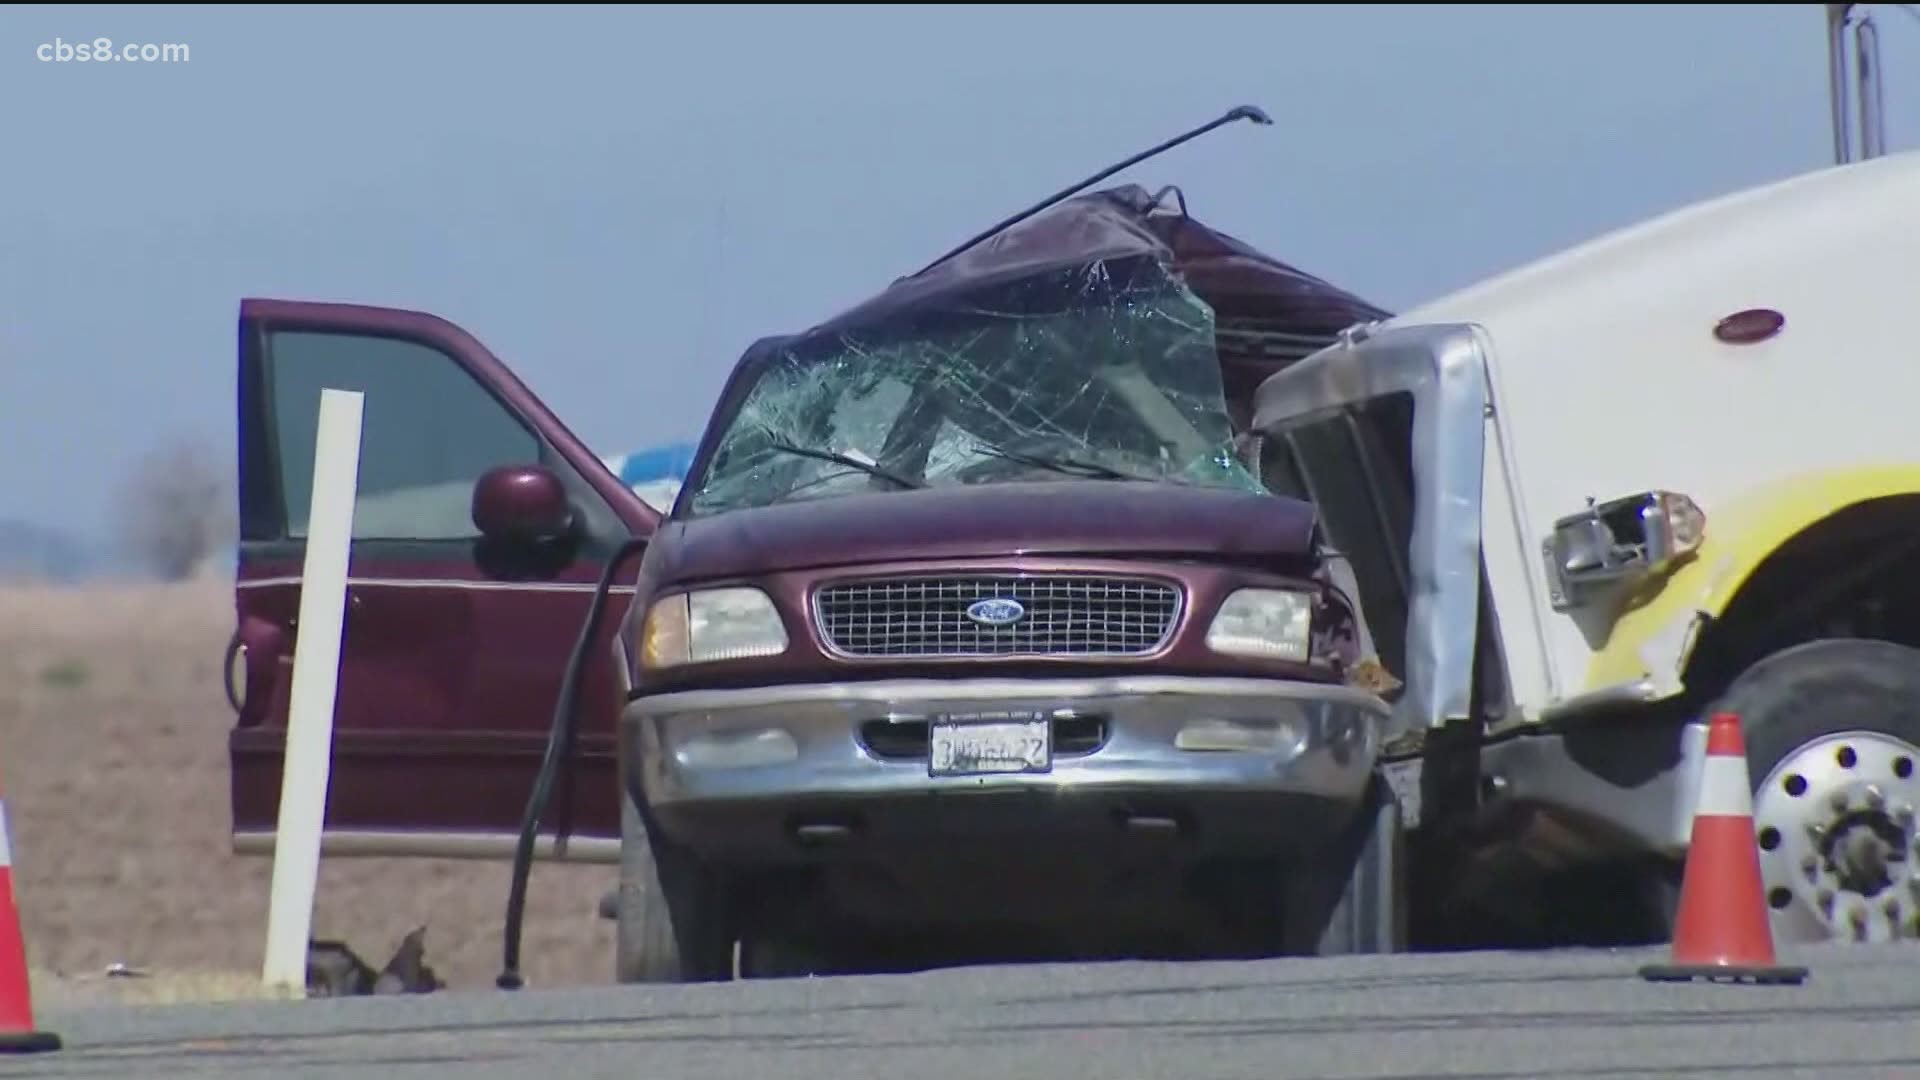 Around 6:15 a.m. on March 2, a big rig and Ford Expedition collided on SR-115 at the intersection of Norrish Road. Link to names: www.cbs8.com/article/news/local